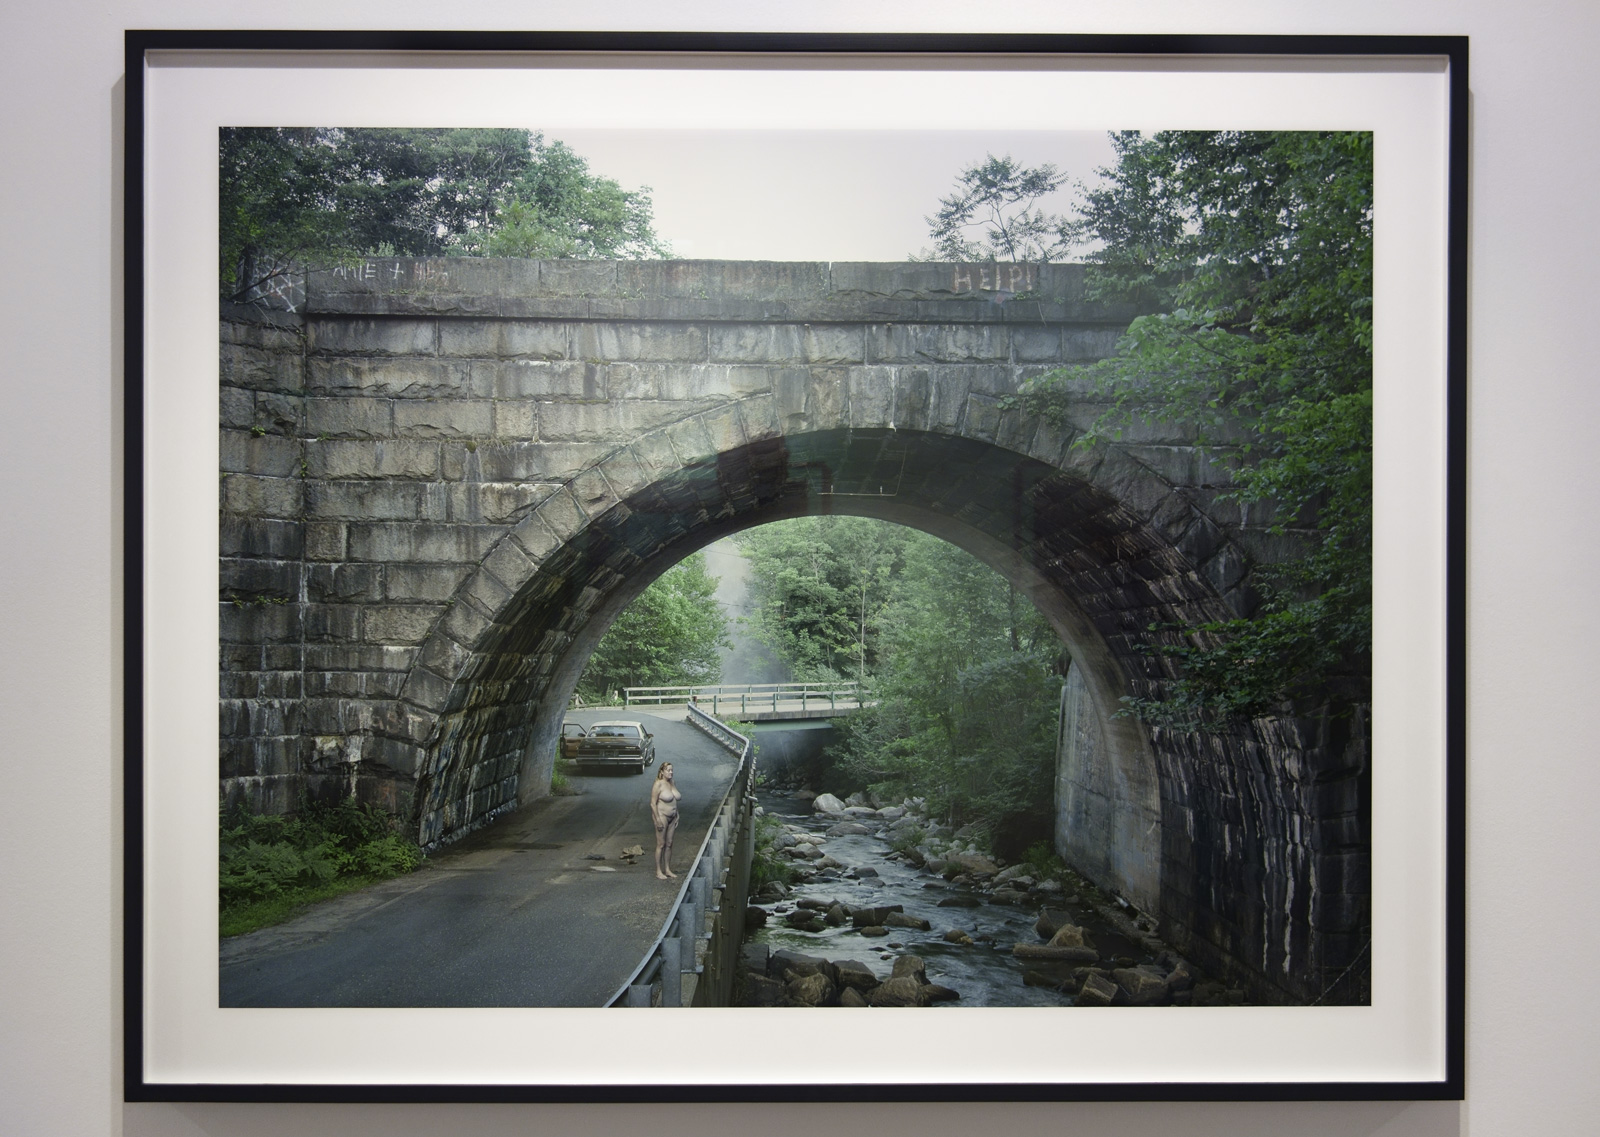 Installation view of Room 3 of 'Gregory Crewdson: Cathedral of the Pines' at The Photographers' Gallery showing 'Woman on Road' 2014